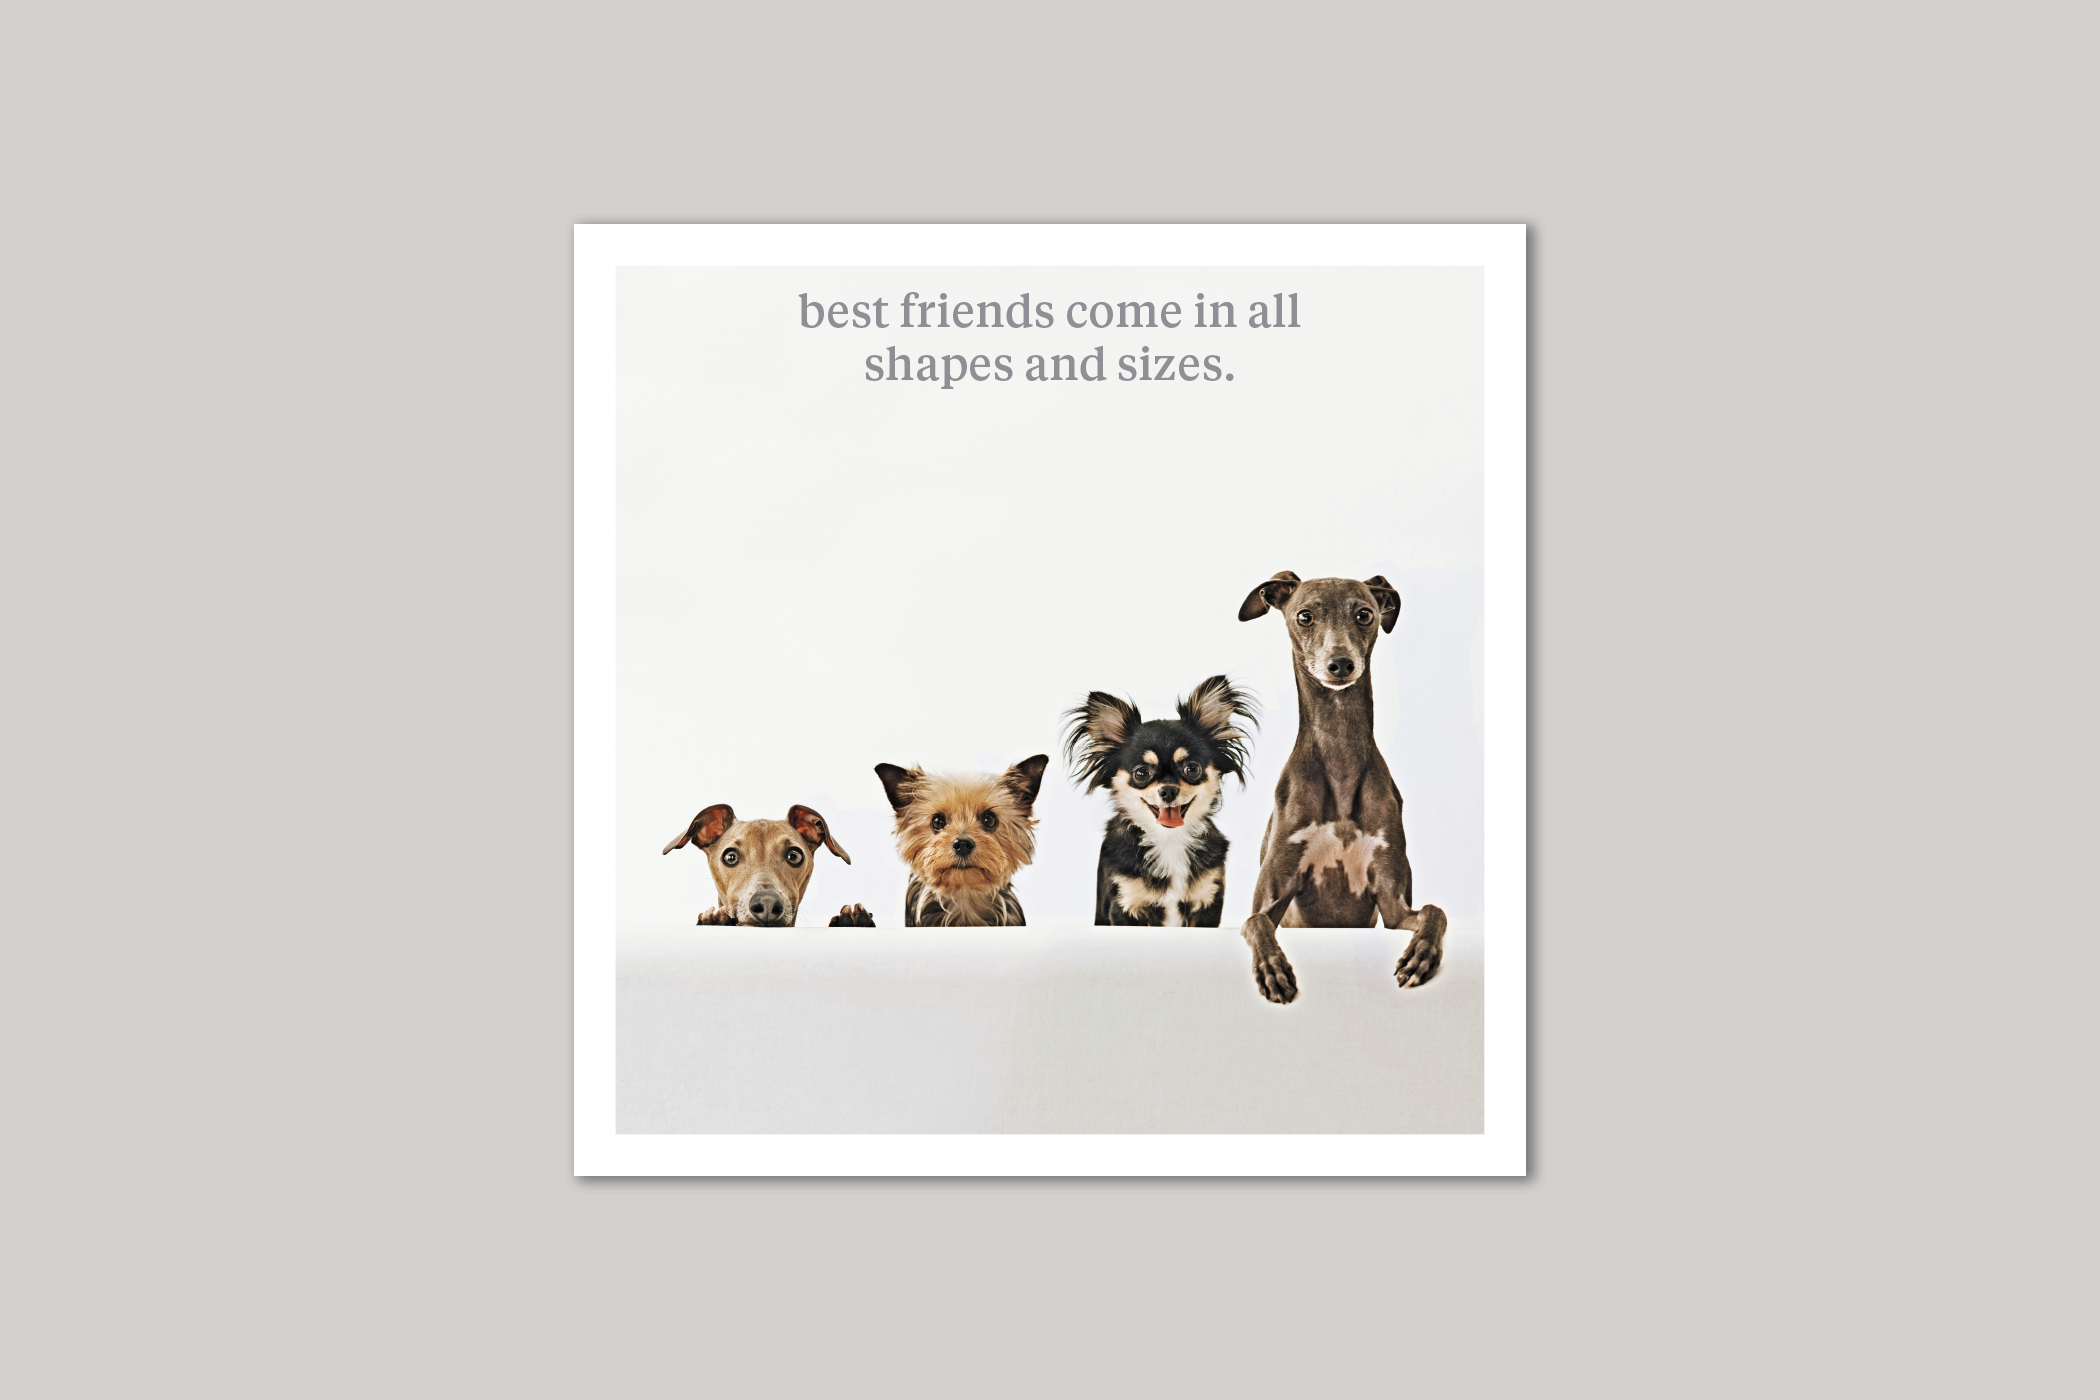 All Shapes and Sizes quirky animal portrait from Curious World range of greeting cards by Icon.